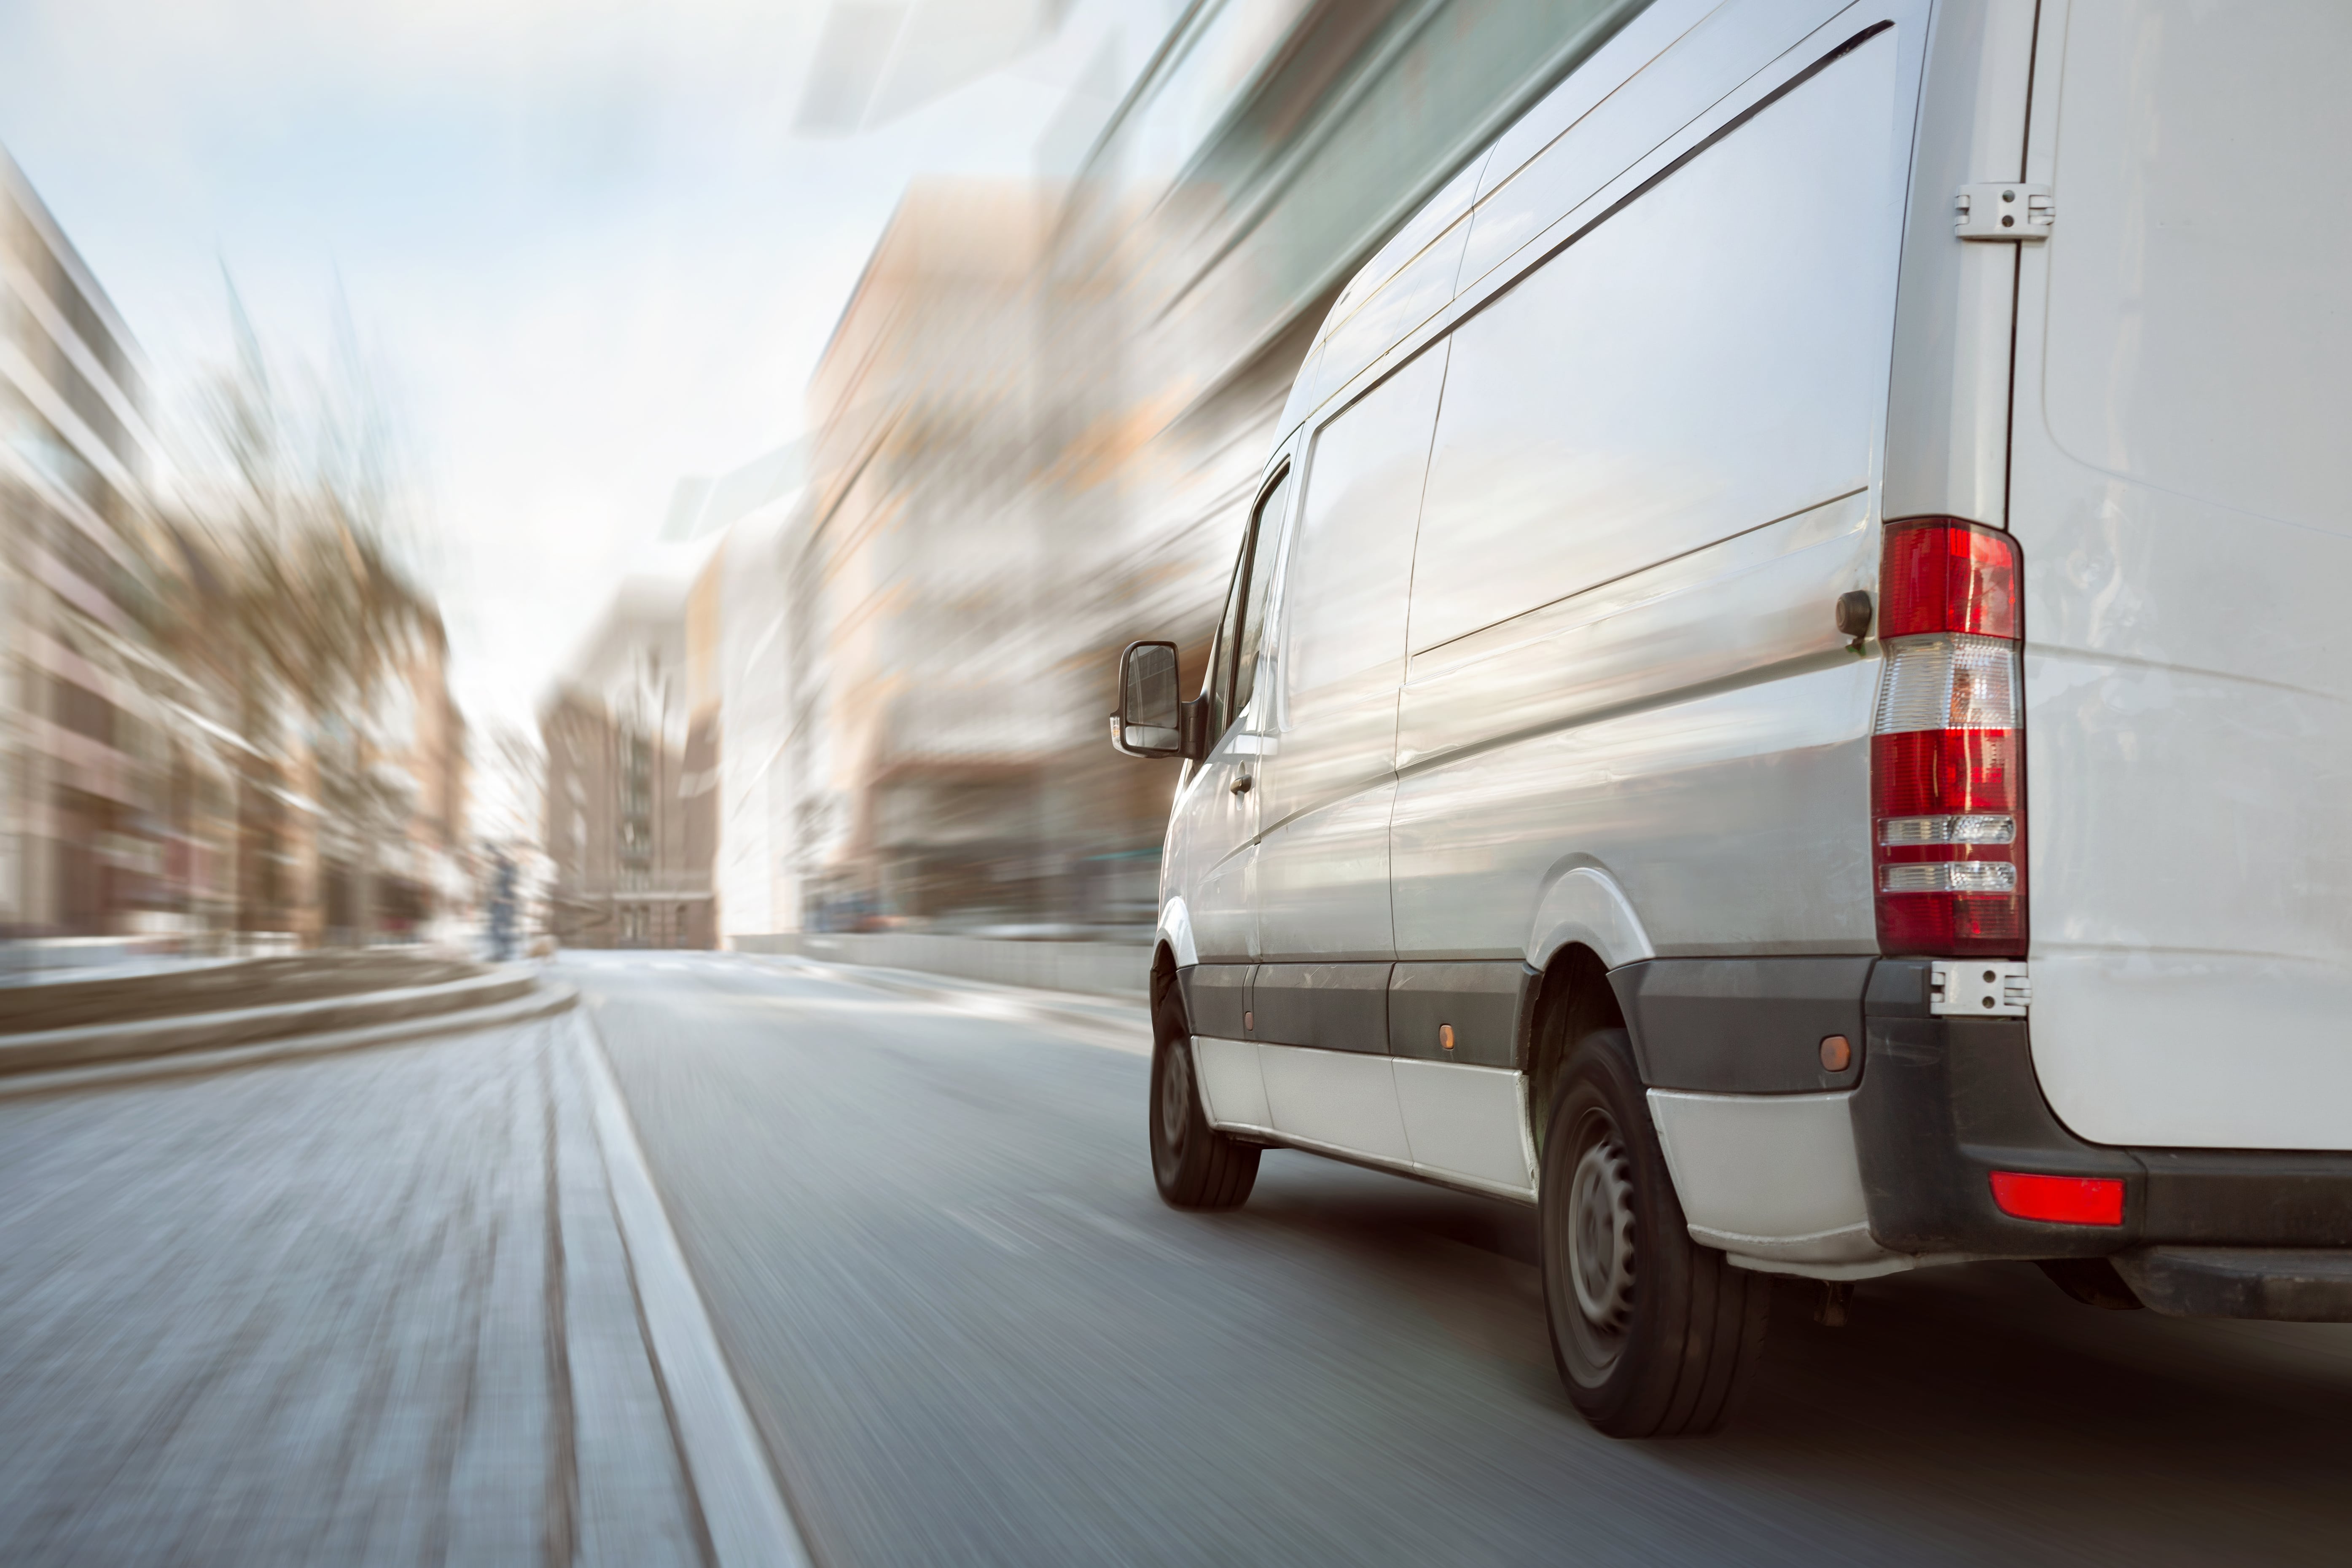 Flexible van hire: what are the practical business benefits?